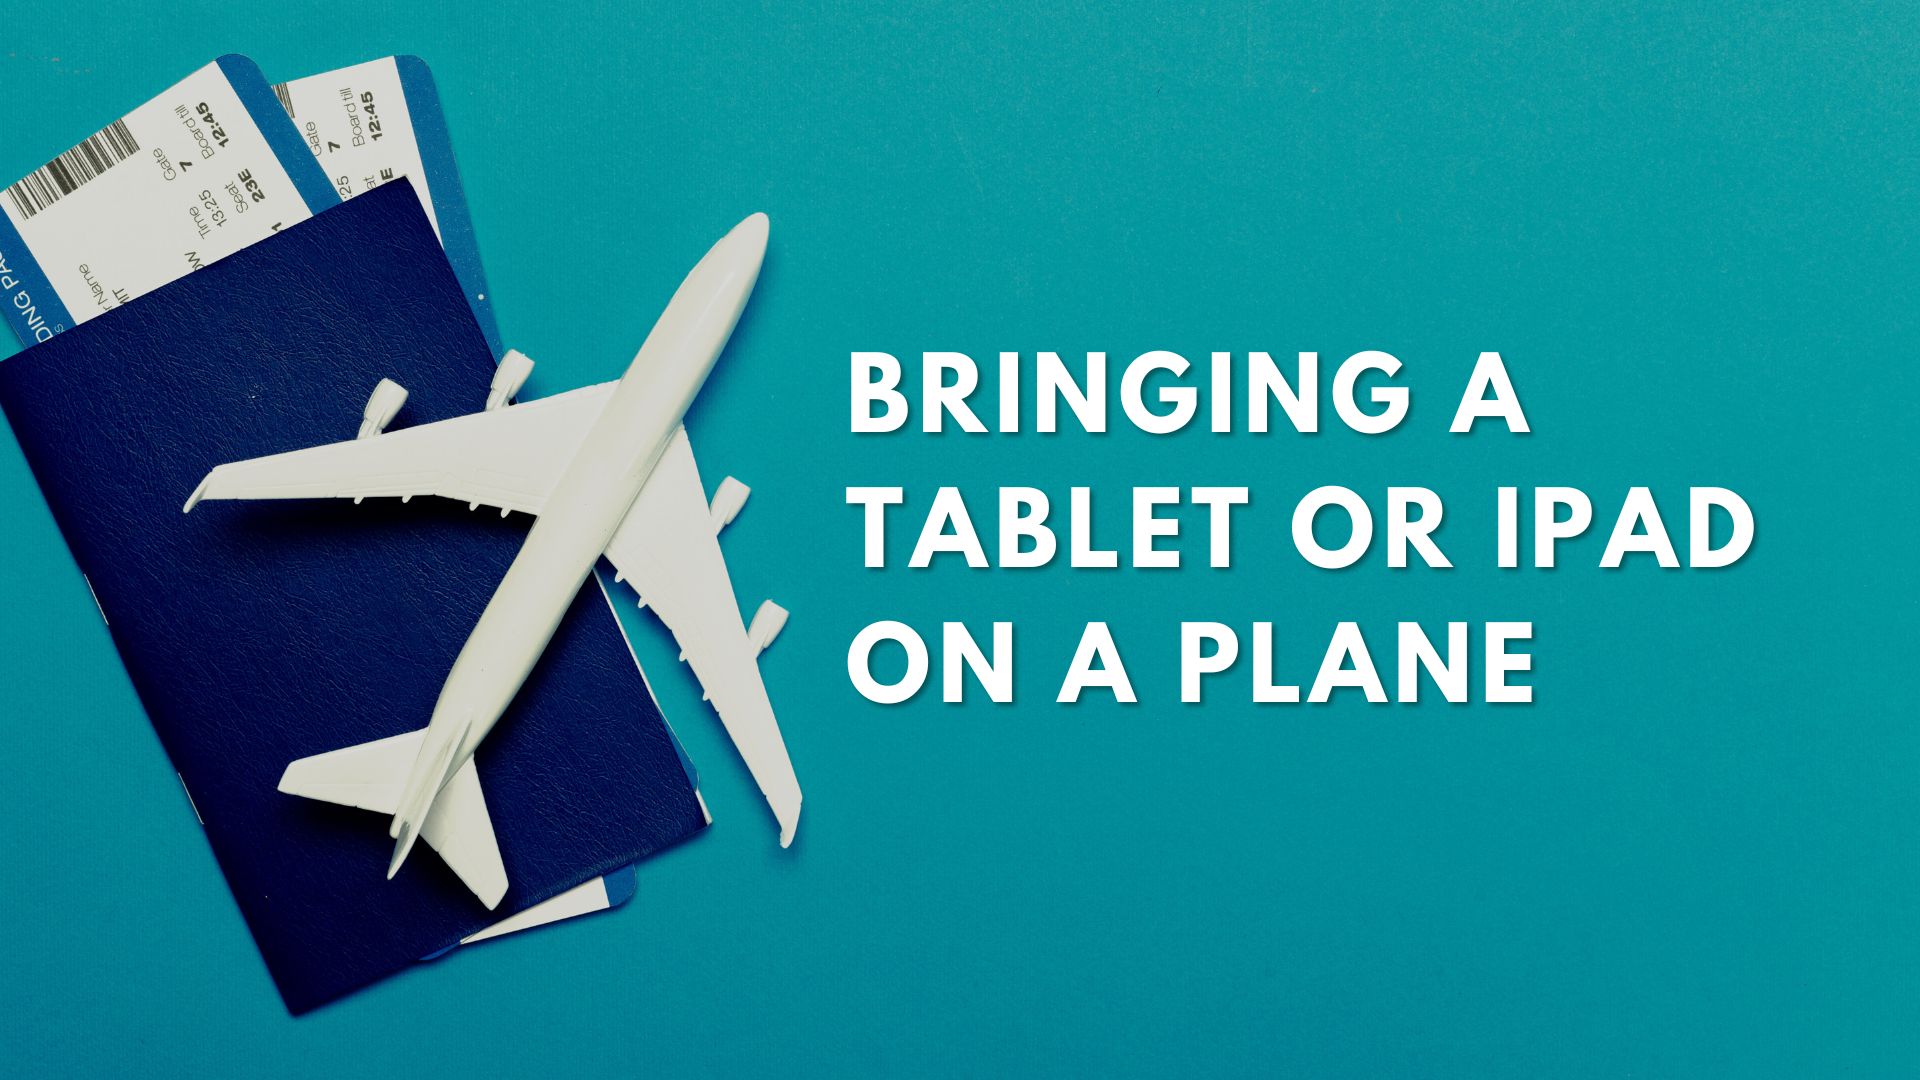 Can You Bring a Tablet or iPad on a Plane